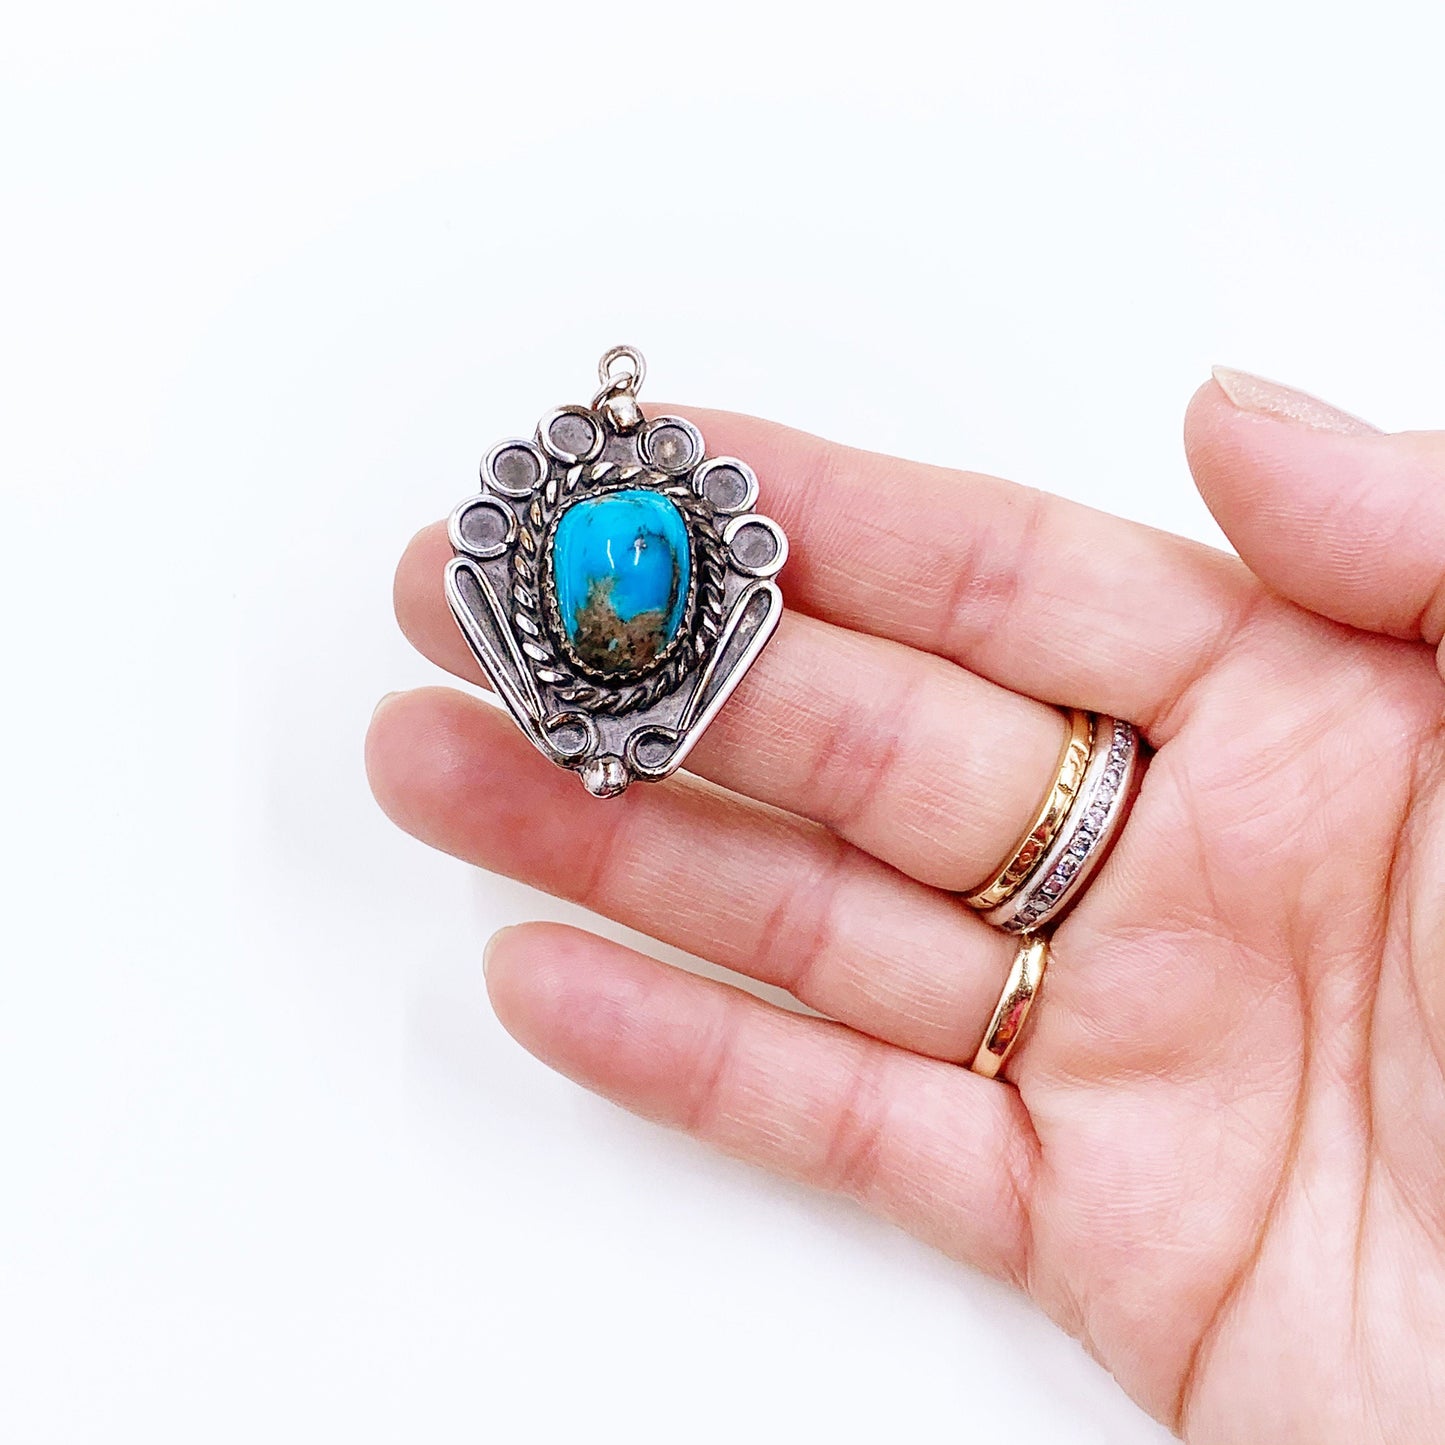 Vintage Silver Turquoise Pendant | Silver Turquoise Wirework Pendant